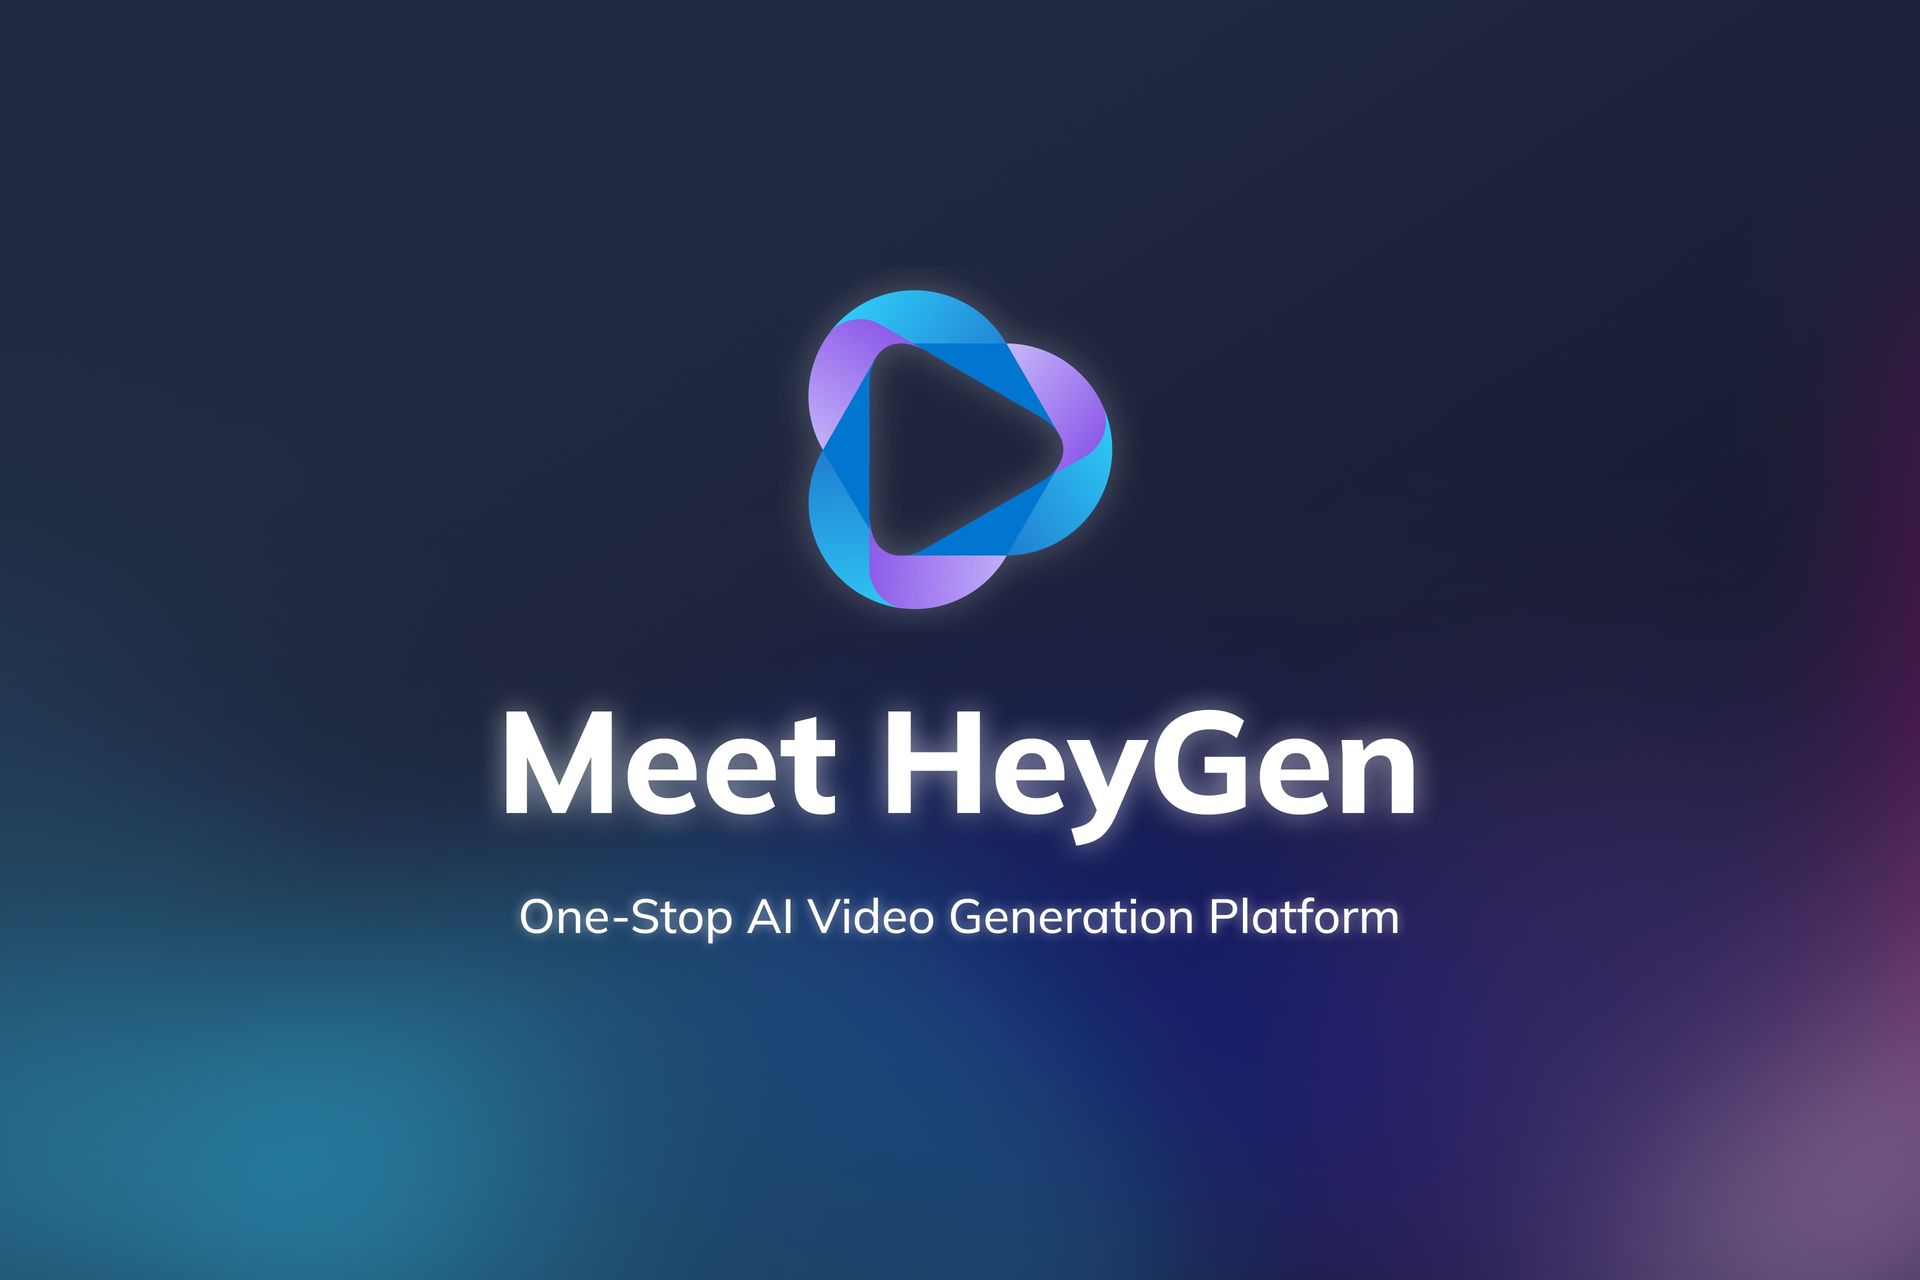 Multilingual content creation is now possible with HeyGen AI Video Translator with 13 languages, including Mandarin, English, and Spanish more!